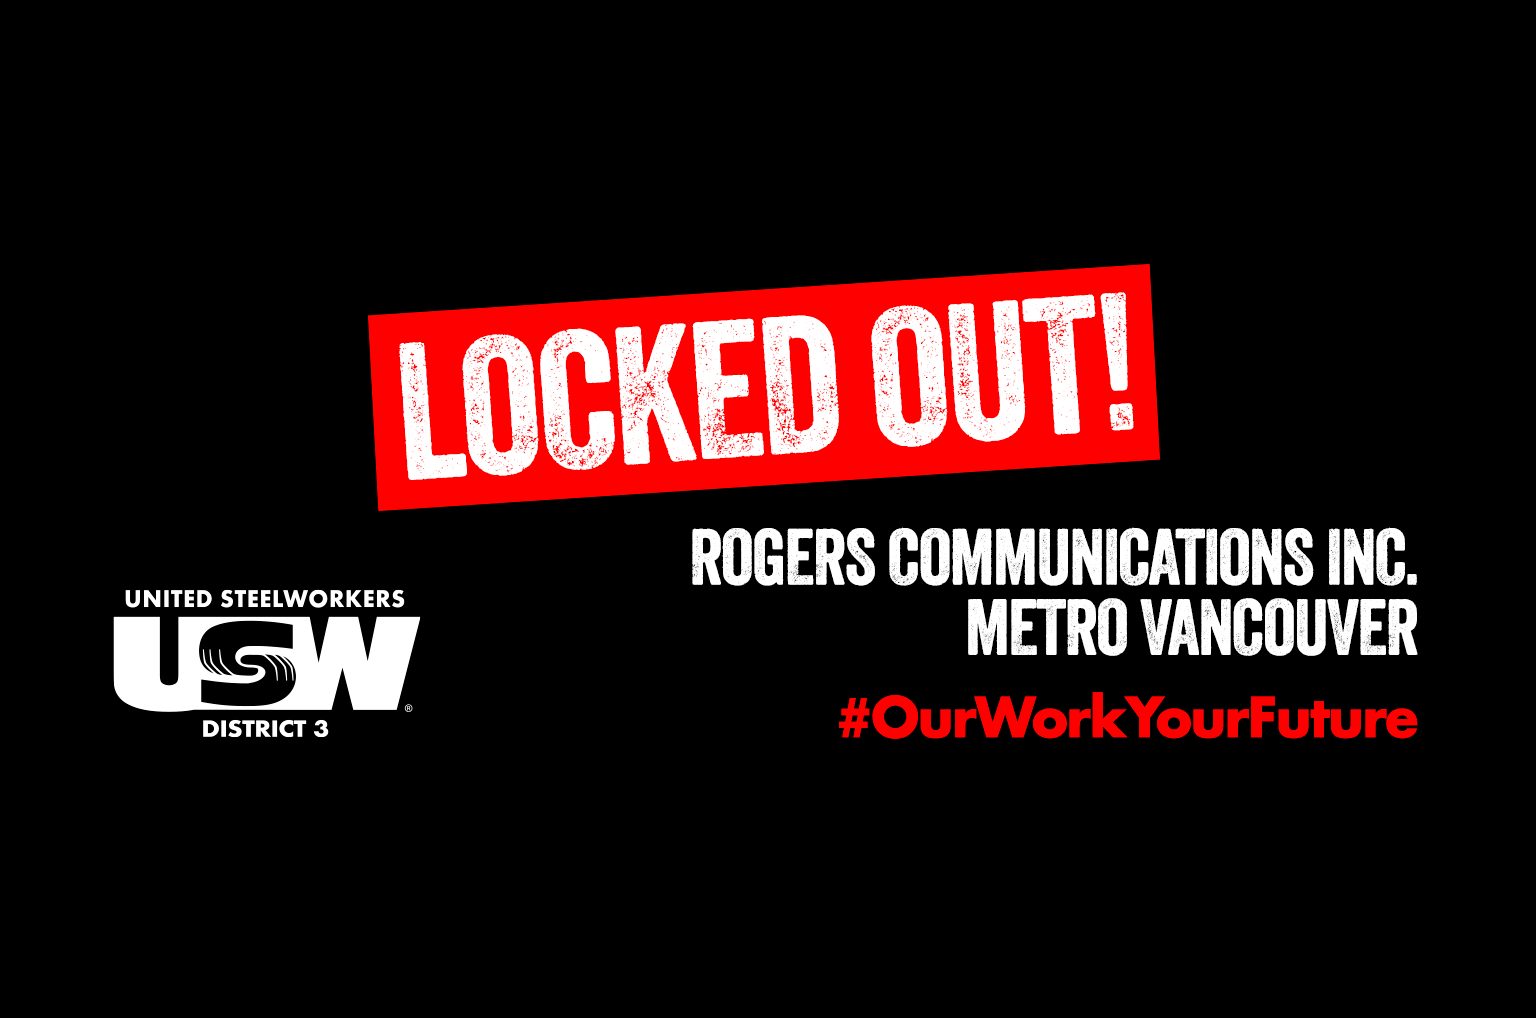 Locked Out! Rogers Communications Inc. Metro Vancouver #OurWorkYourFuture